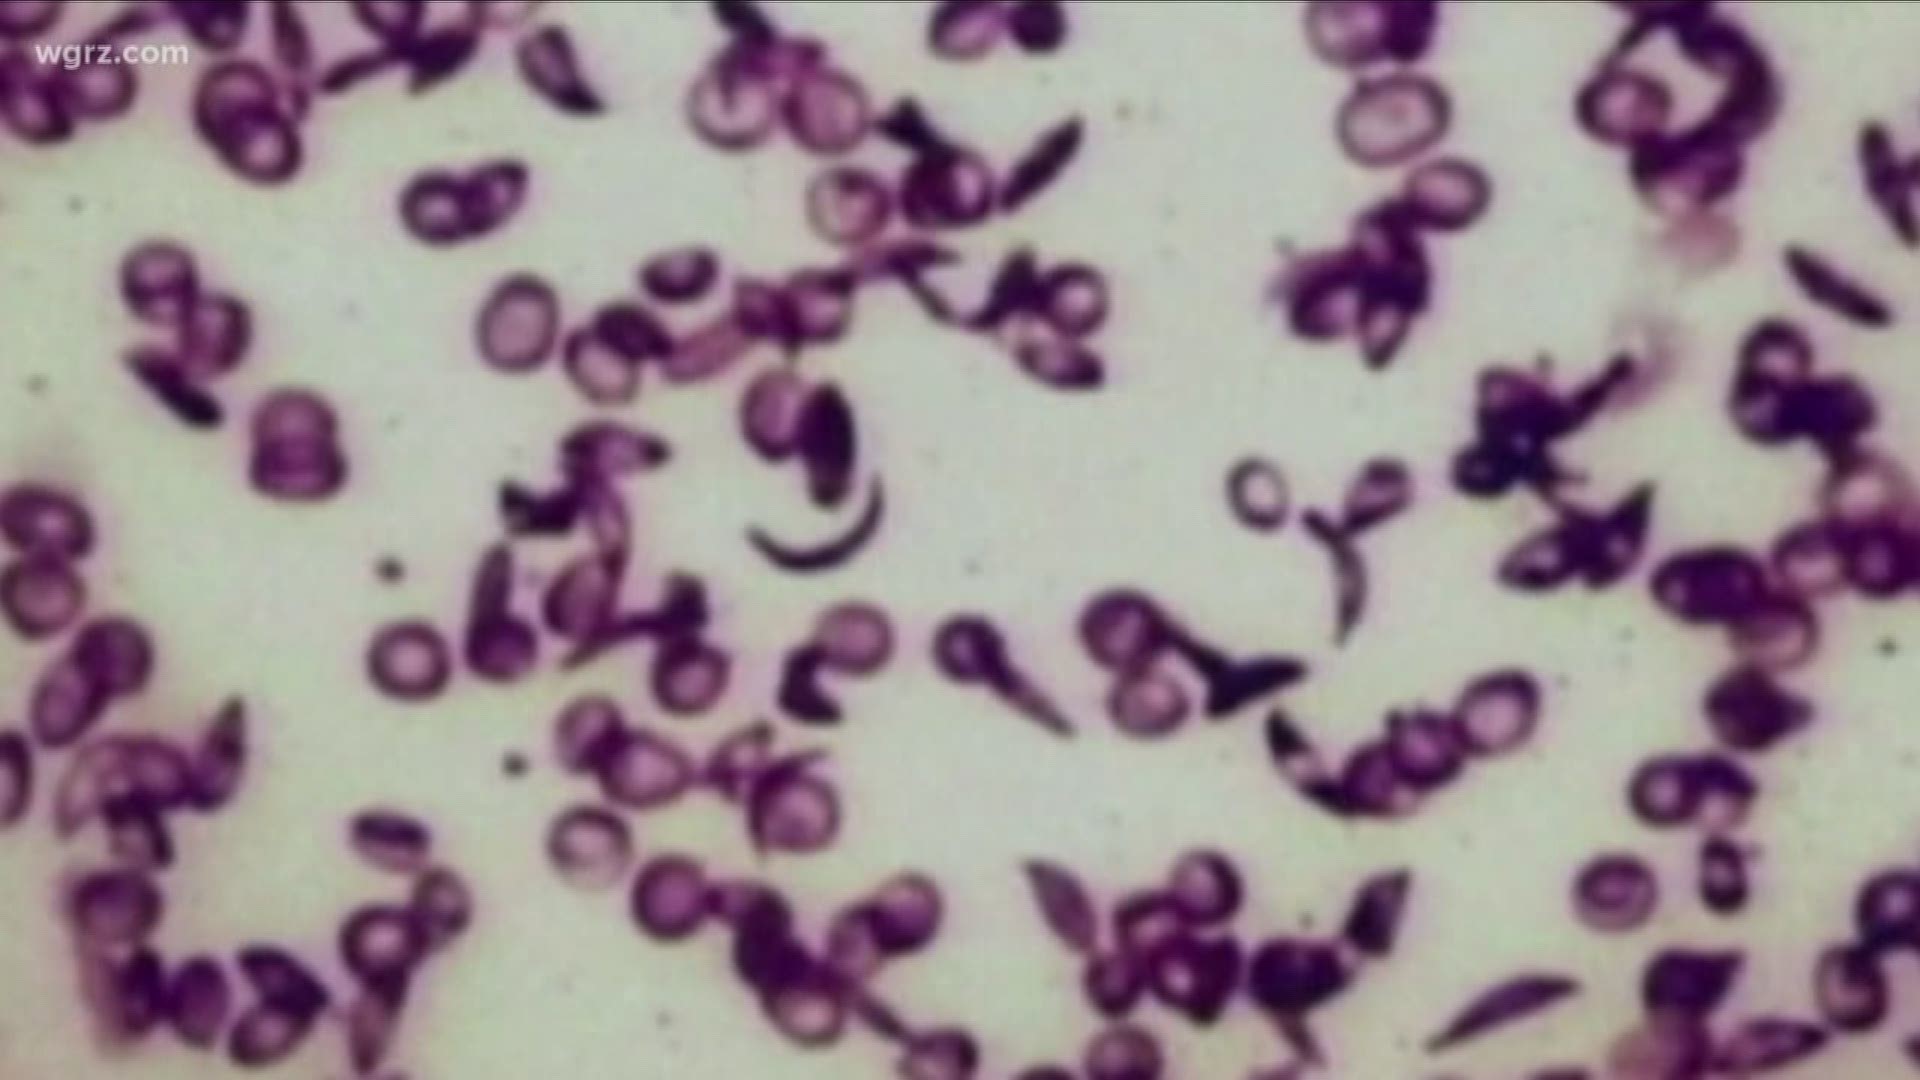 New drug could make difference for sickle cell